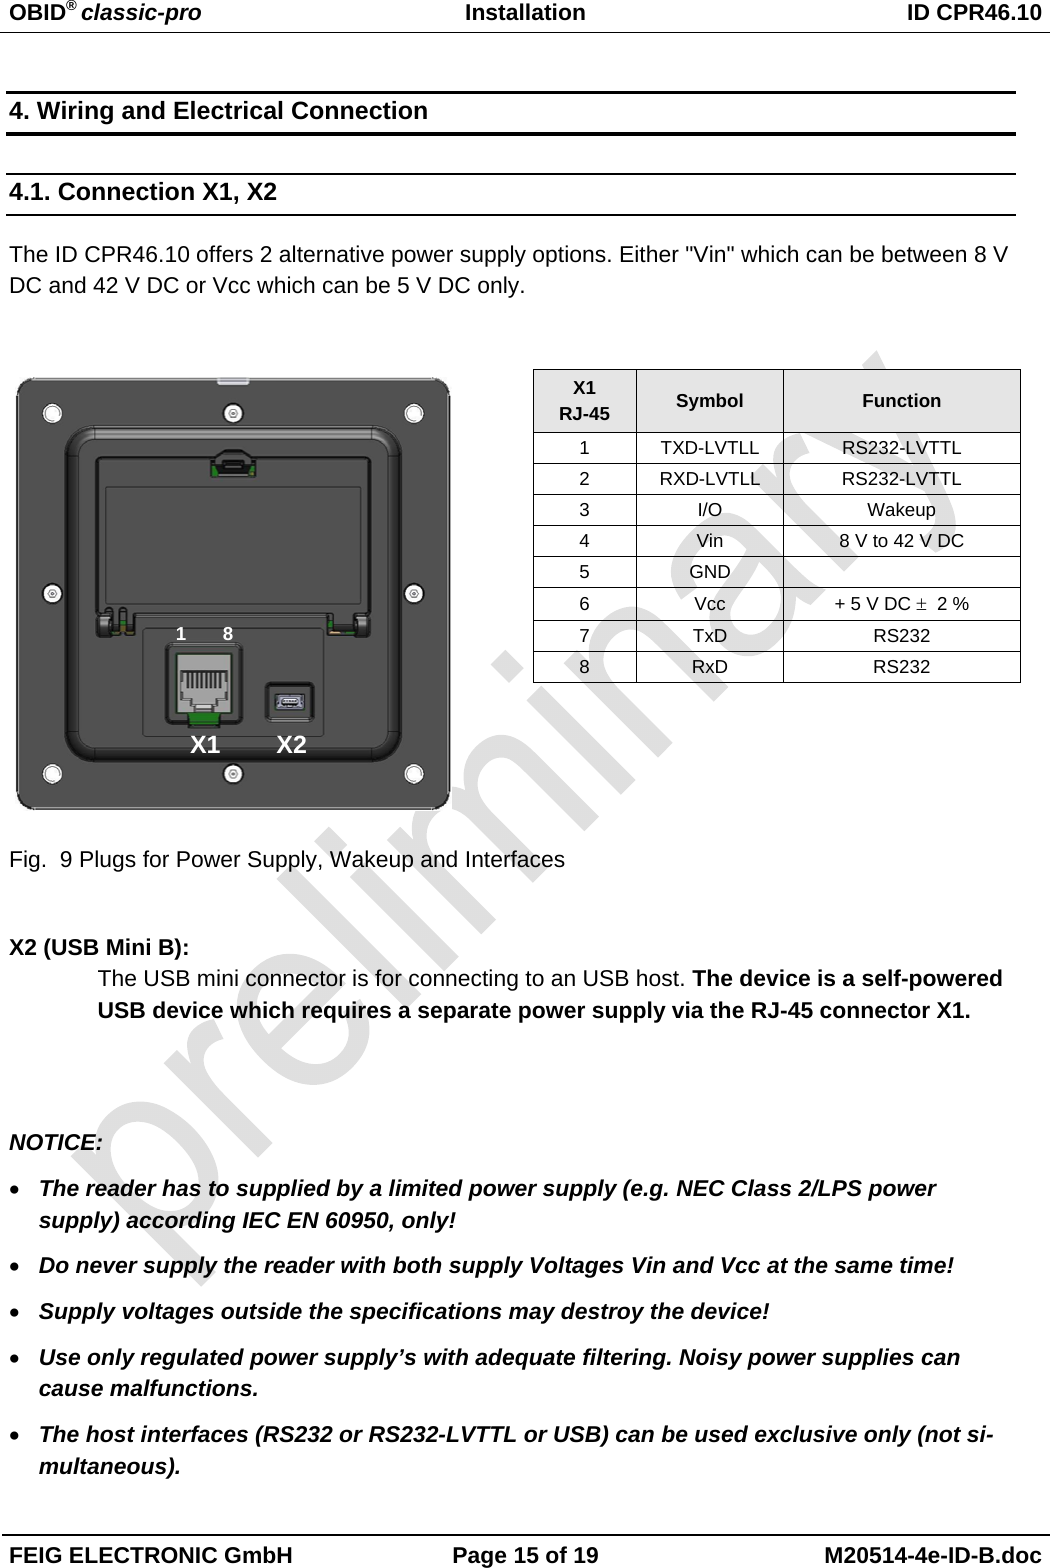 OBID® classic-pro Installation  ID CPR46.10  FEIG ELECTRONIC GmbH  Page 15 of 19  M20514-4e-ID-B.doc  4. Wiring and Electrical Connection 4.1. Connection X1, X2  The ID CPR46.10 offers 2 alternative power supply options. Either &quot;Vin&quot; which can be between 8 V DC and 42 V DC or Vcc which can be 5 V DC only.             Fig.  9 Plugs for Power Supply, Wakeup and Interfaces  X2 (USB Mini B): The USB mini connector is for connecting to an USB host. The device is a self-powered USB device which requires a separate power supply via the RJ-45 connector X1.   NOTICE: • The reader has to supplied by a limited power supply (e.g. NEC Class 2/LPS power supply) according IEC EN 60950, only! • Do never supply the reader with both supply Voltages Vin and Vcc at the same time! • Supply voltages outside the specifications may destroy the device!  • Use only regulated power supply’s with adequate filtering. Noisy power supplies can cause malfunctions. • The host interfaces (RS232 or RS232-LVTTL or USB) can be used exclusive only (not si-multaneous).  X1 RJ-45  Symbol  Function 1 TXD-LVTLL  RS232-LVTTL 2 RXD-LVTLL  RS232-LVTTL 3 I/O  Wakeup 4  Vin  8 V to 42 V DC 5 GND   6 Vcc  + 5 V DC ± 2 % 7 TxD  RS232 8 RxD  RS232 X1        X2 1 8 